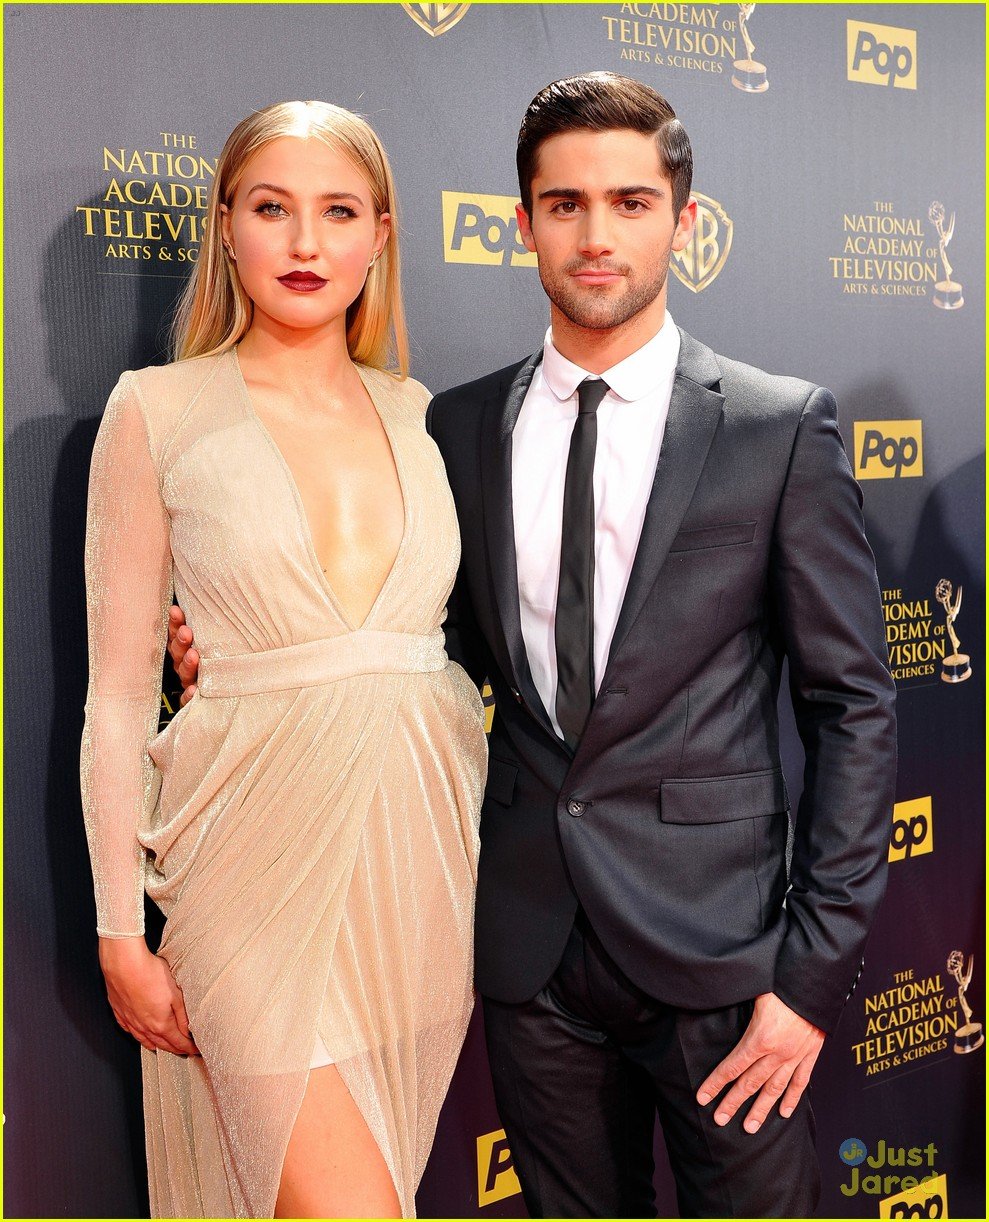 Veronica Dunne And Max Ehrich Couple Up For Daytime Emmys 2015 Hunter King Wins Again Photo